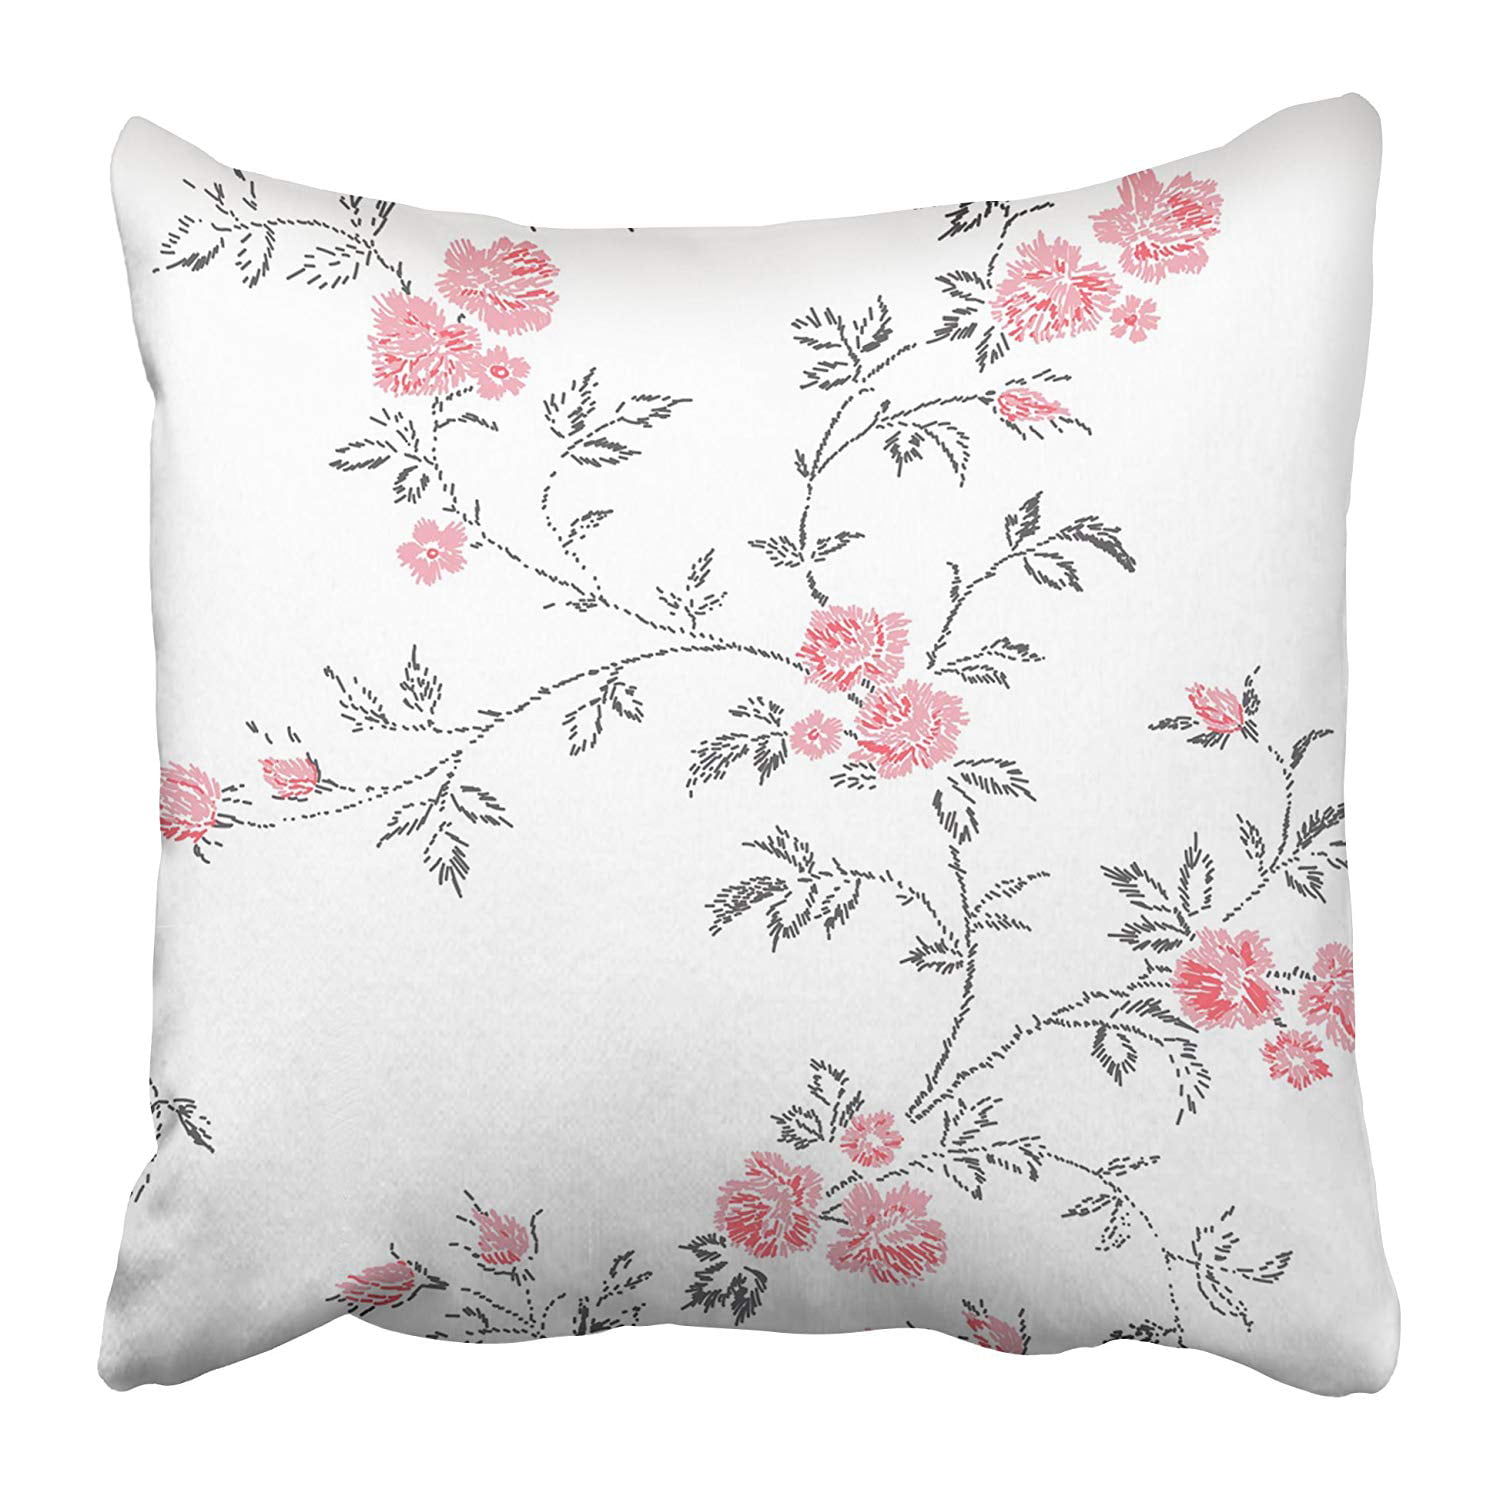 floral embroidery 16x16inch home decor cushion cover Embroidery pillow case